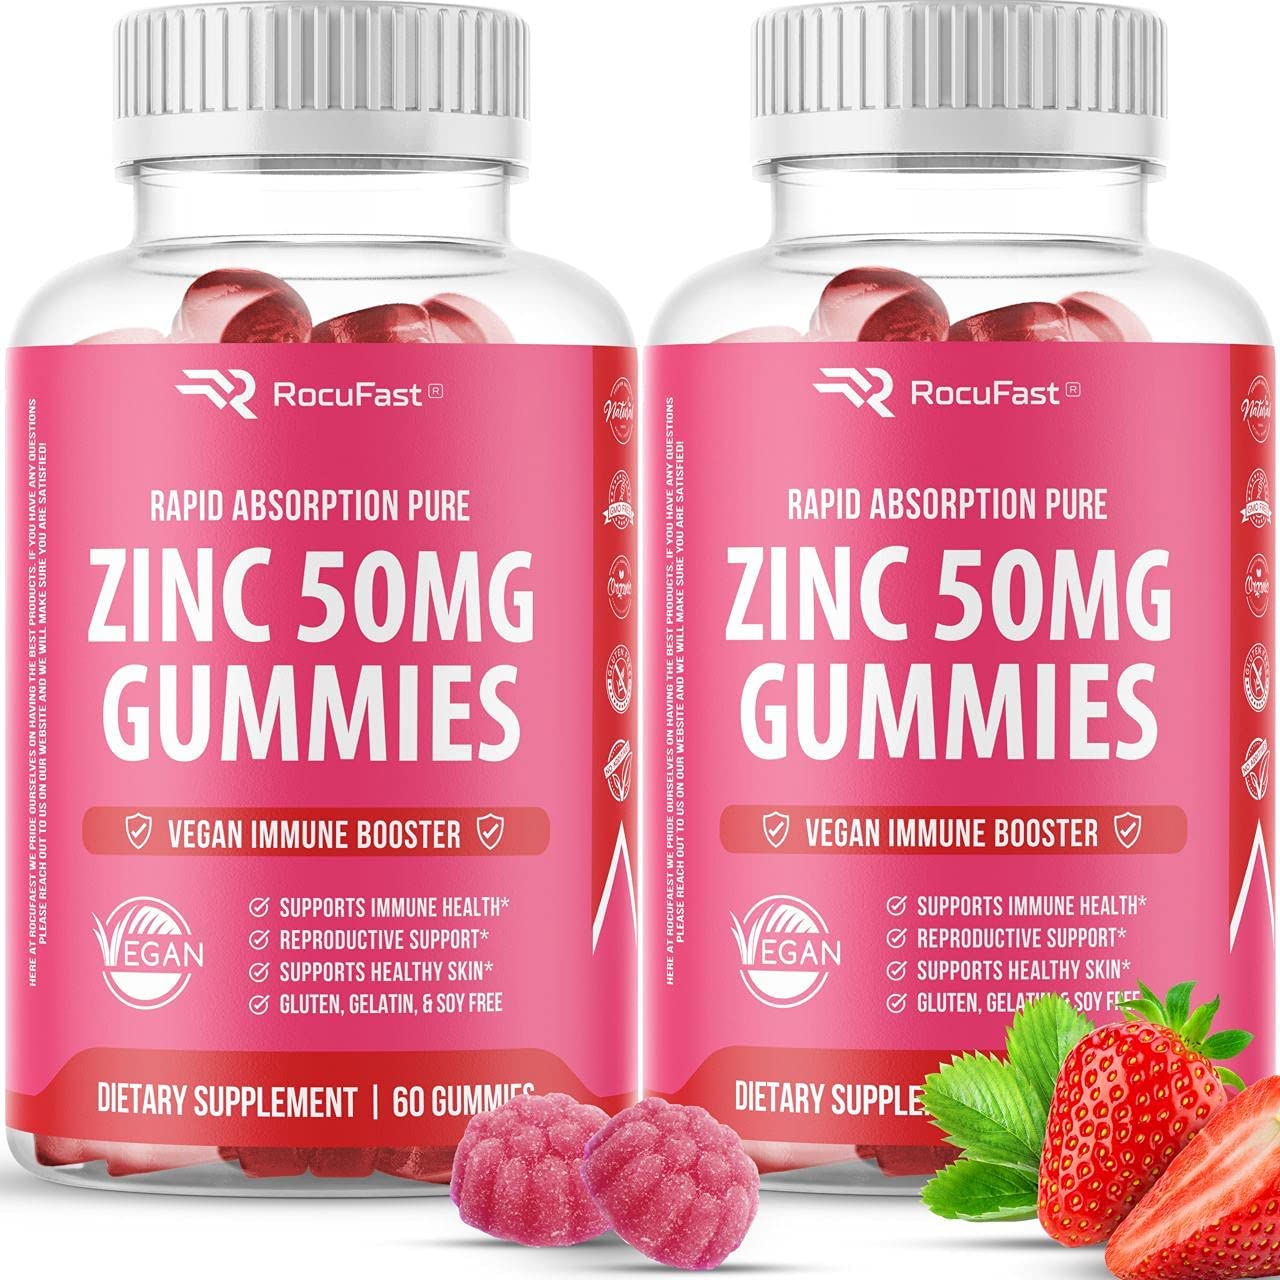 Are zinc supplements worth taking?